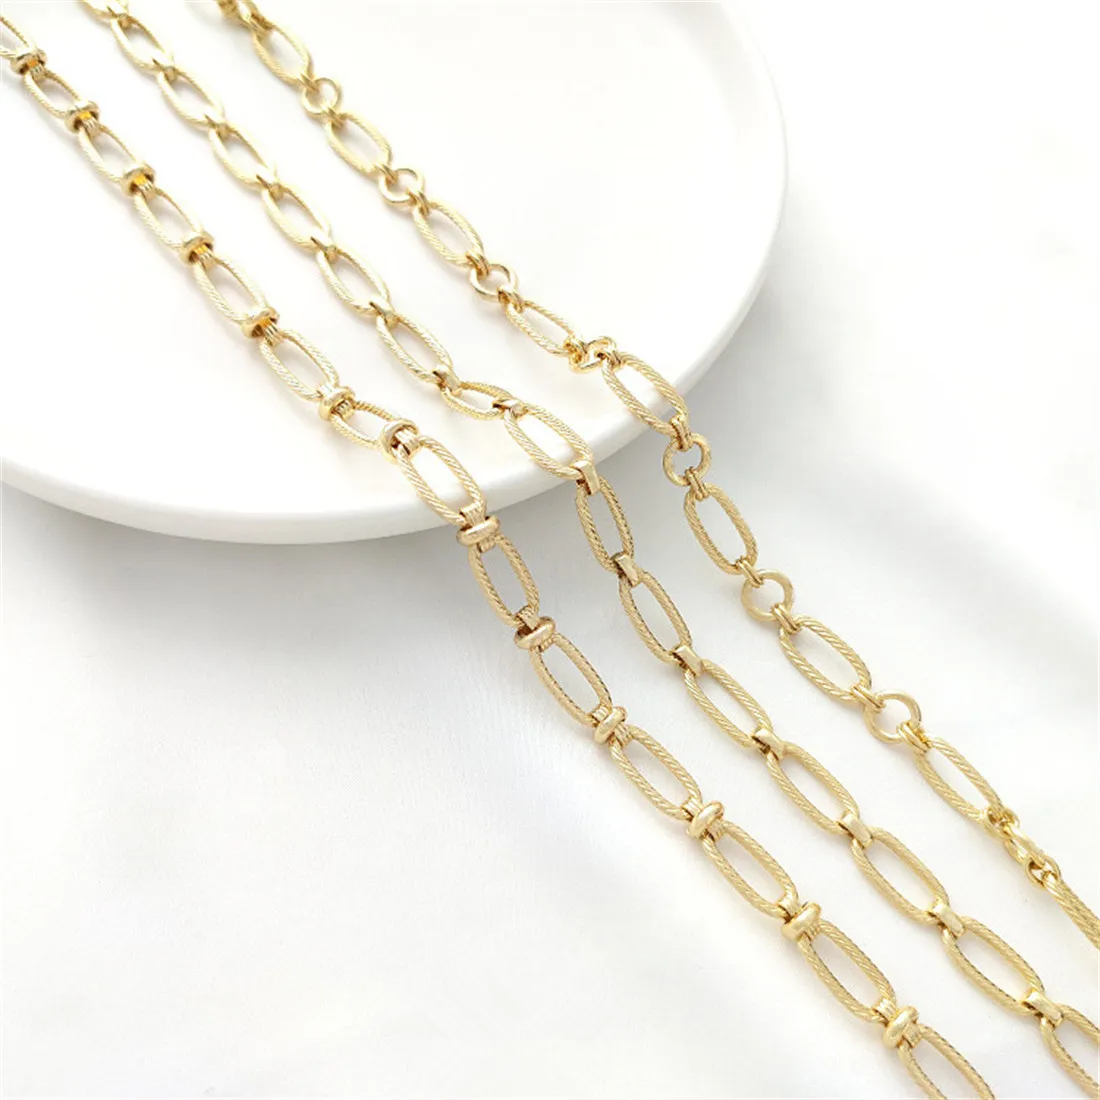 14K Gold Wrapped Oval Fried Dough Twists Chain Manual Long O-ring Chain Diy Bracelet Necklace Jewelry Hand Made Loose Chain B671